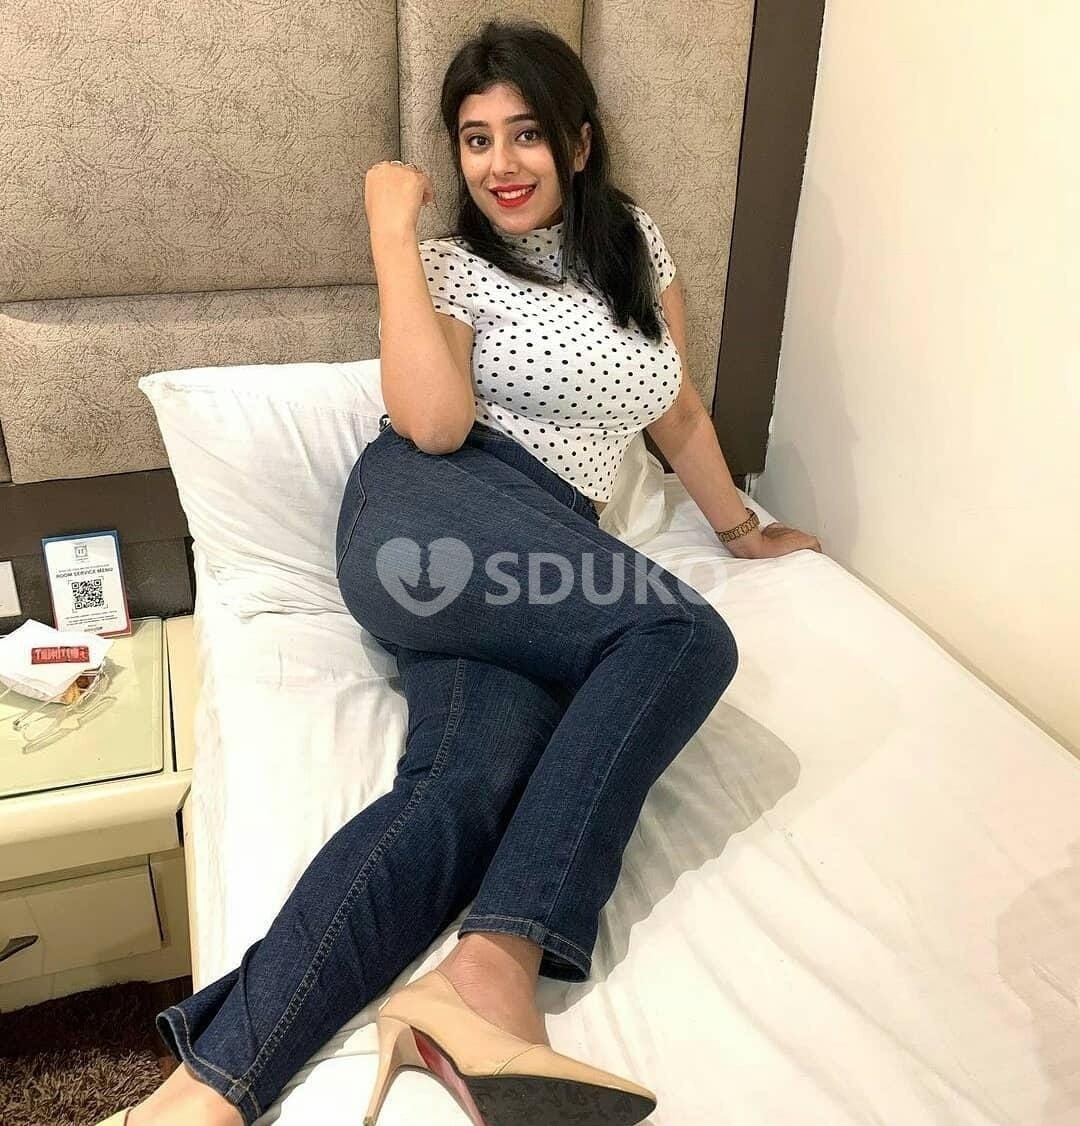 CHITTORGARH ♥️MYSELF SWETA CALL GIRL & BODY-2-BODY MASSAGE SPA SERVICES OUTCALL OUTCALL INCALL 24 HOURS...